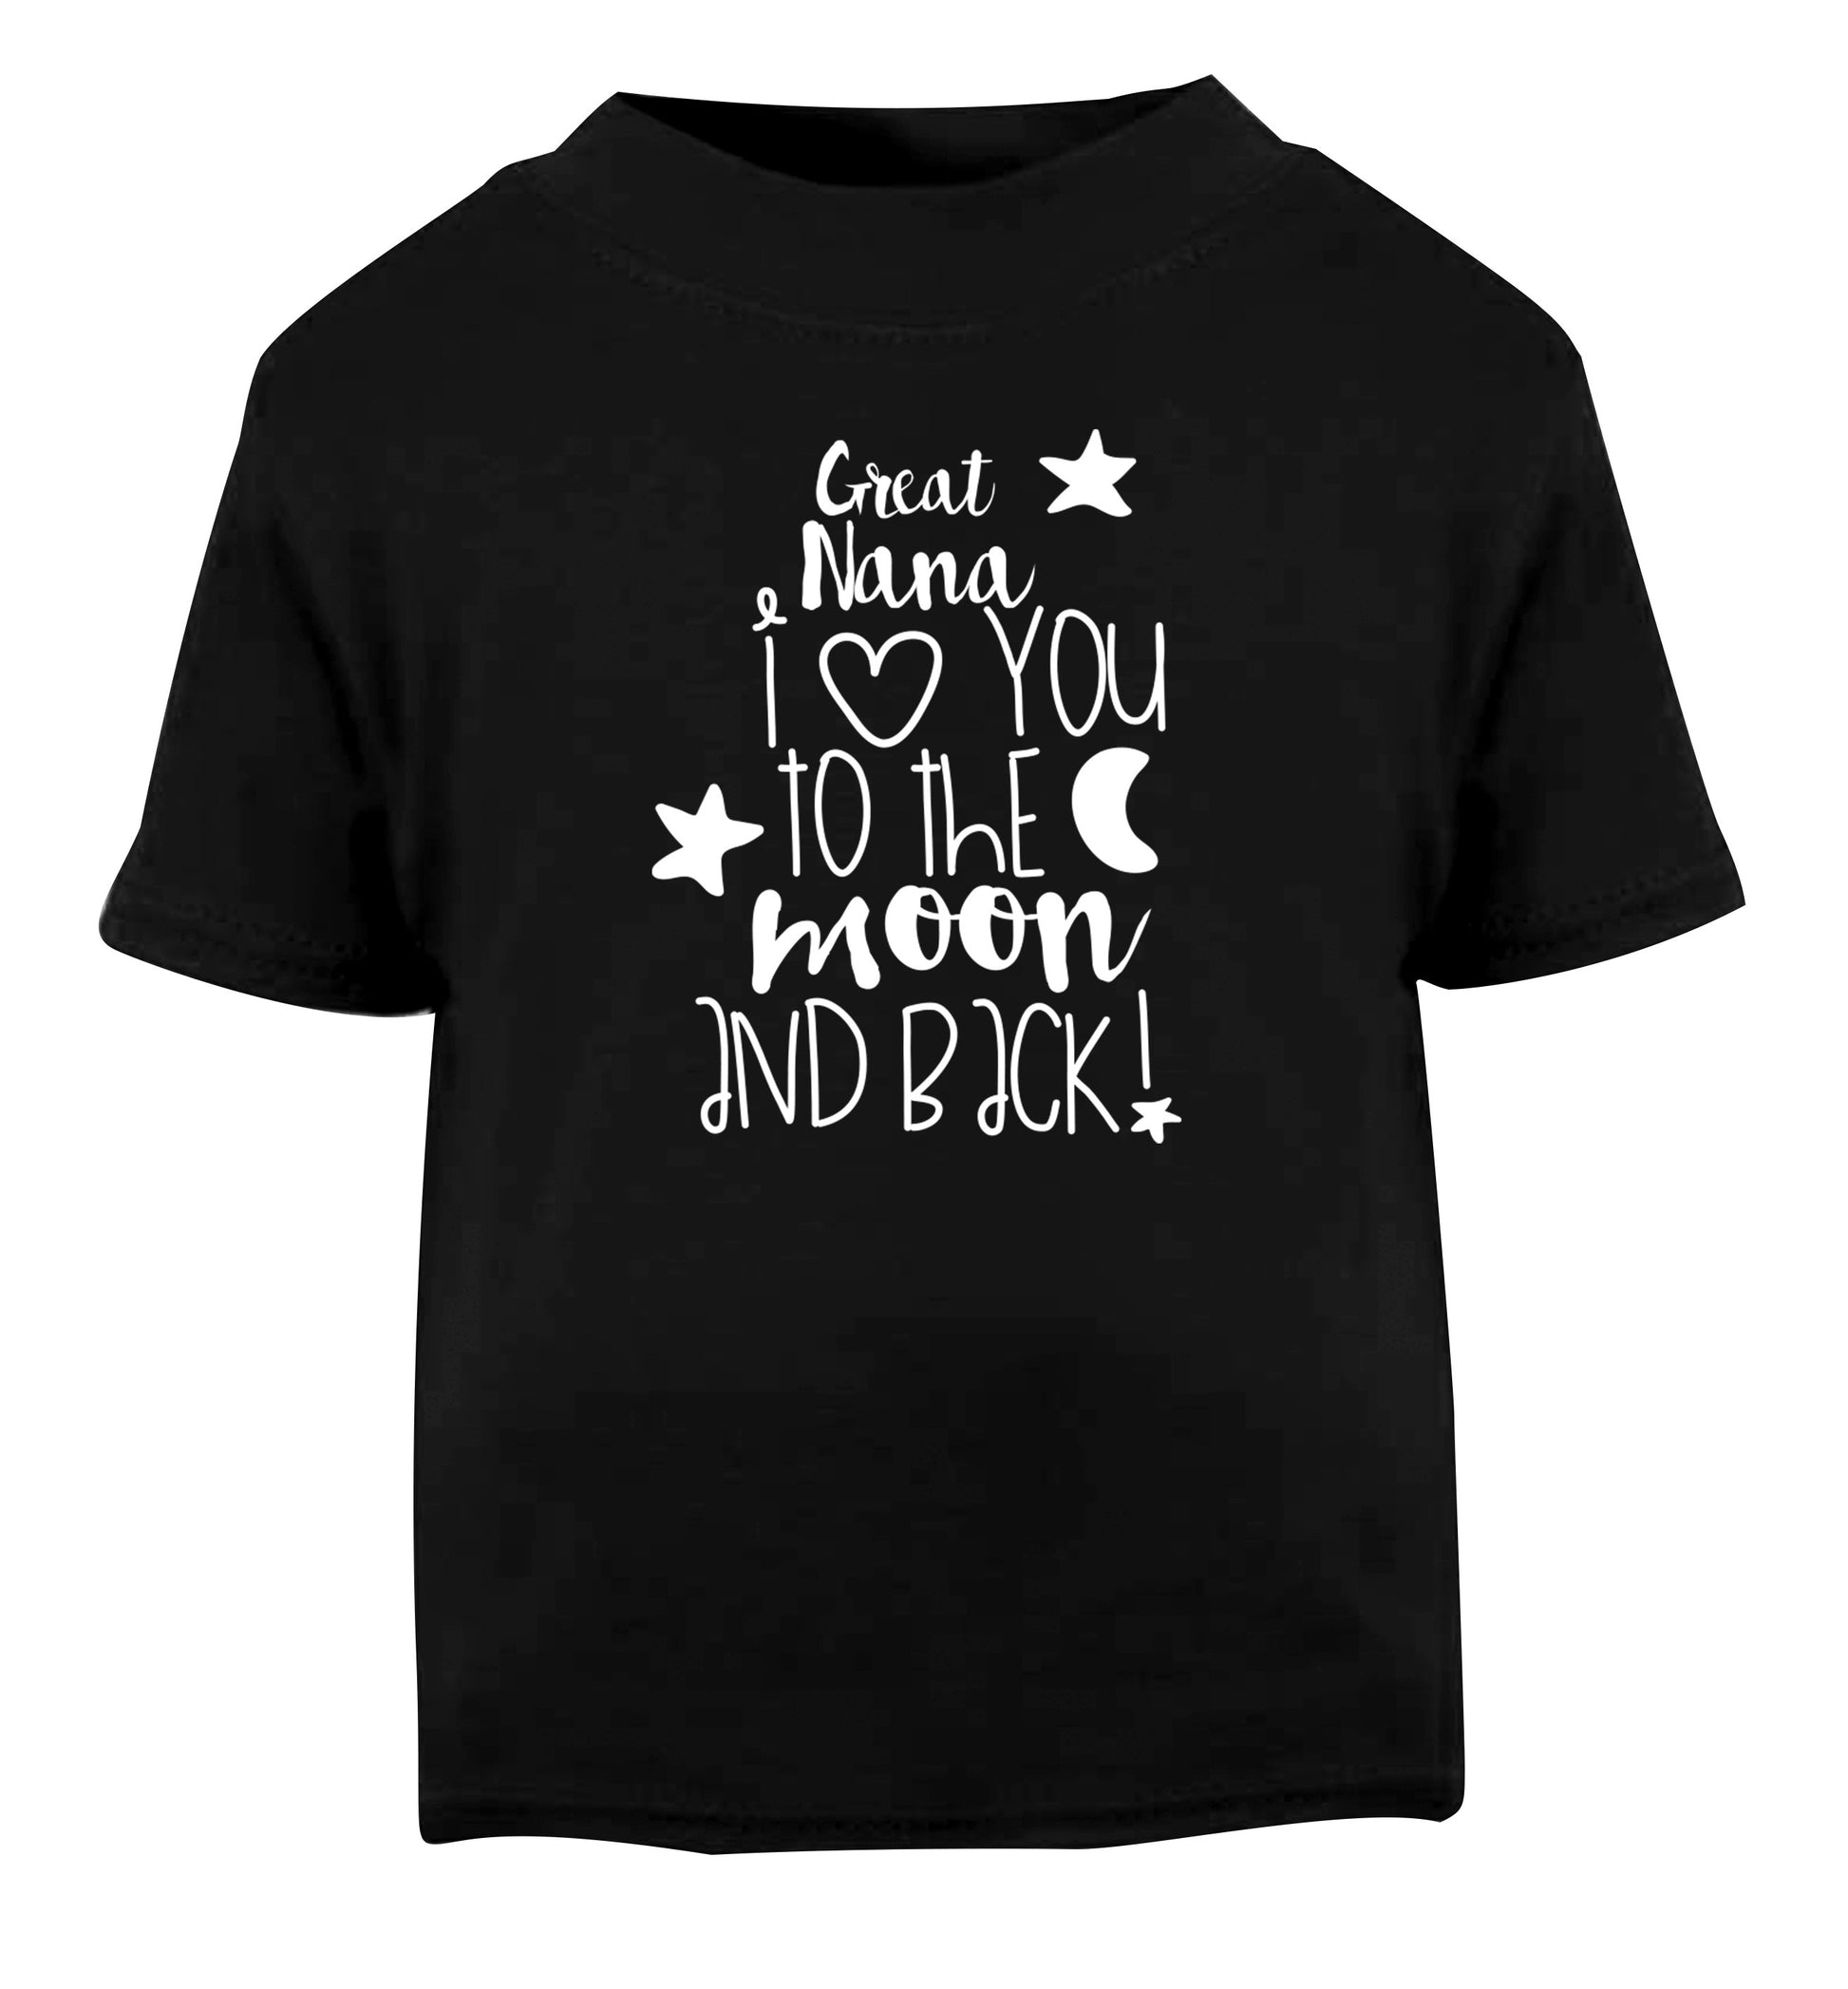 Great Nana I love you to the moon and back Black Baby Toddler Tshirt 2 years